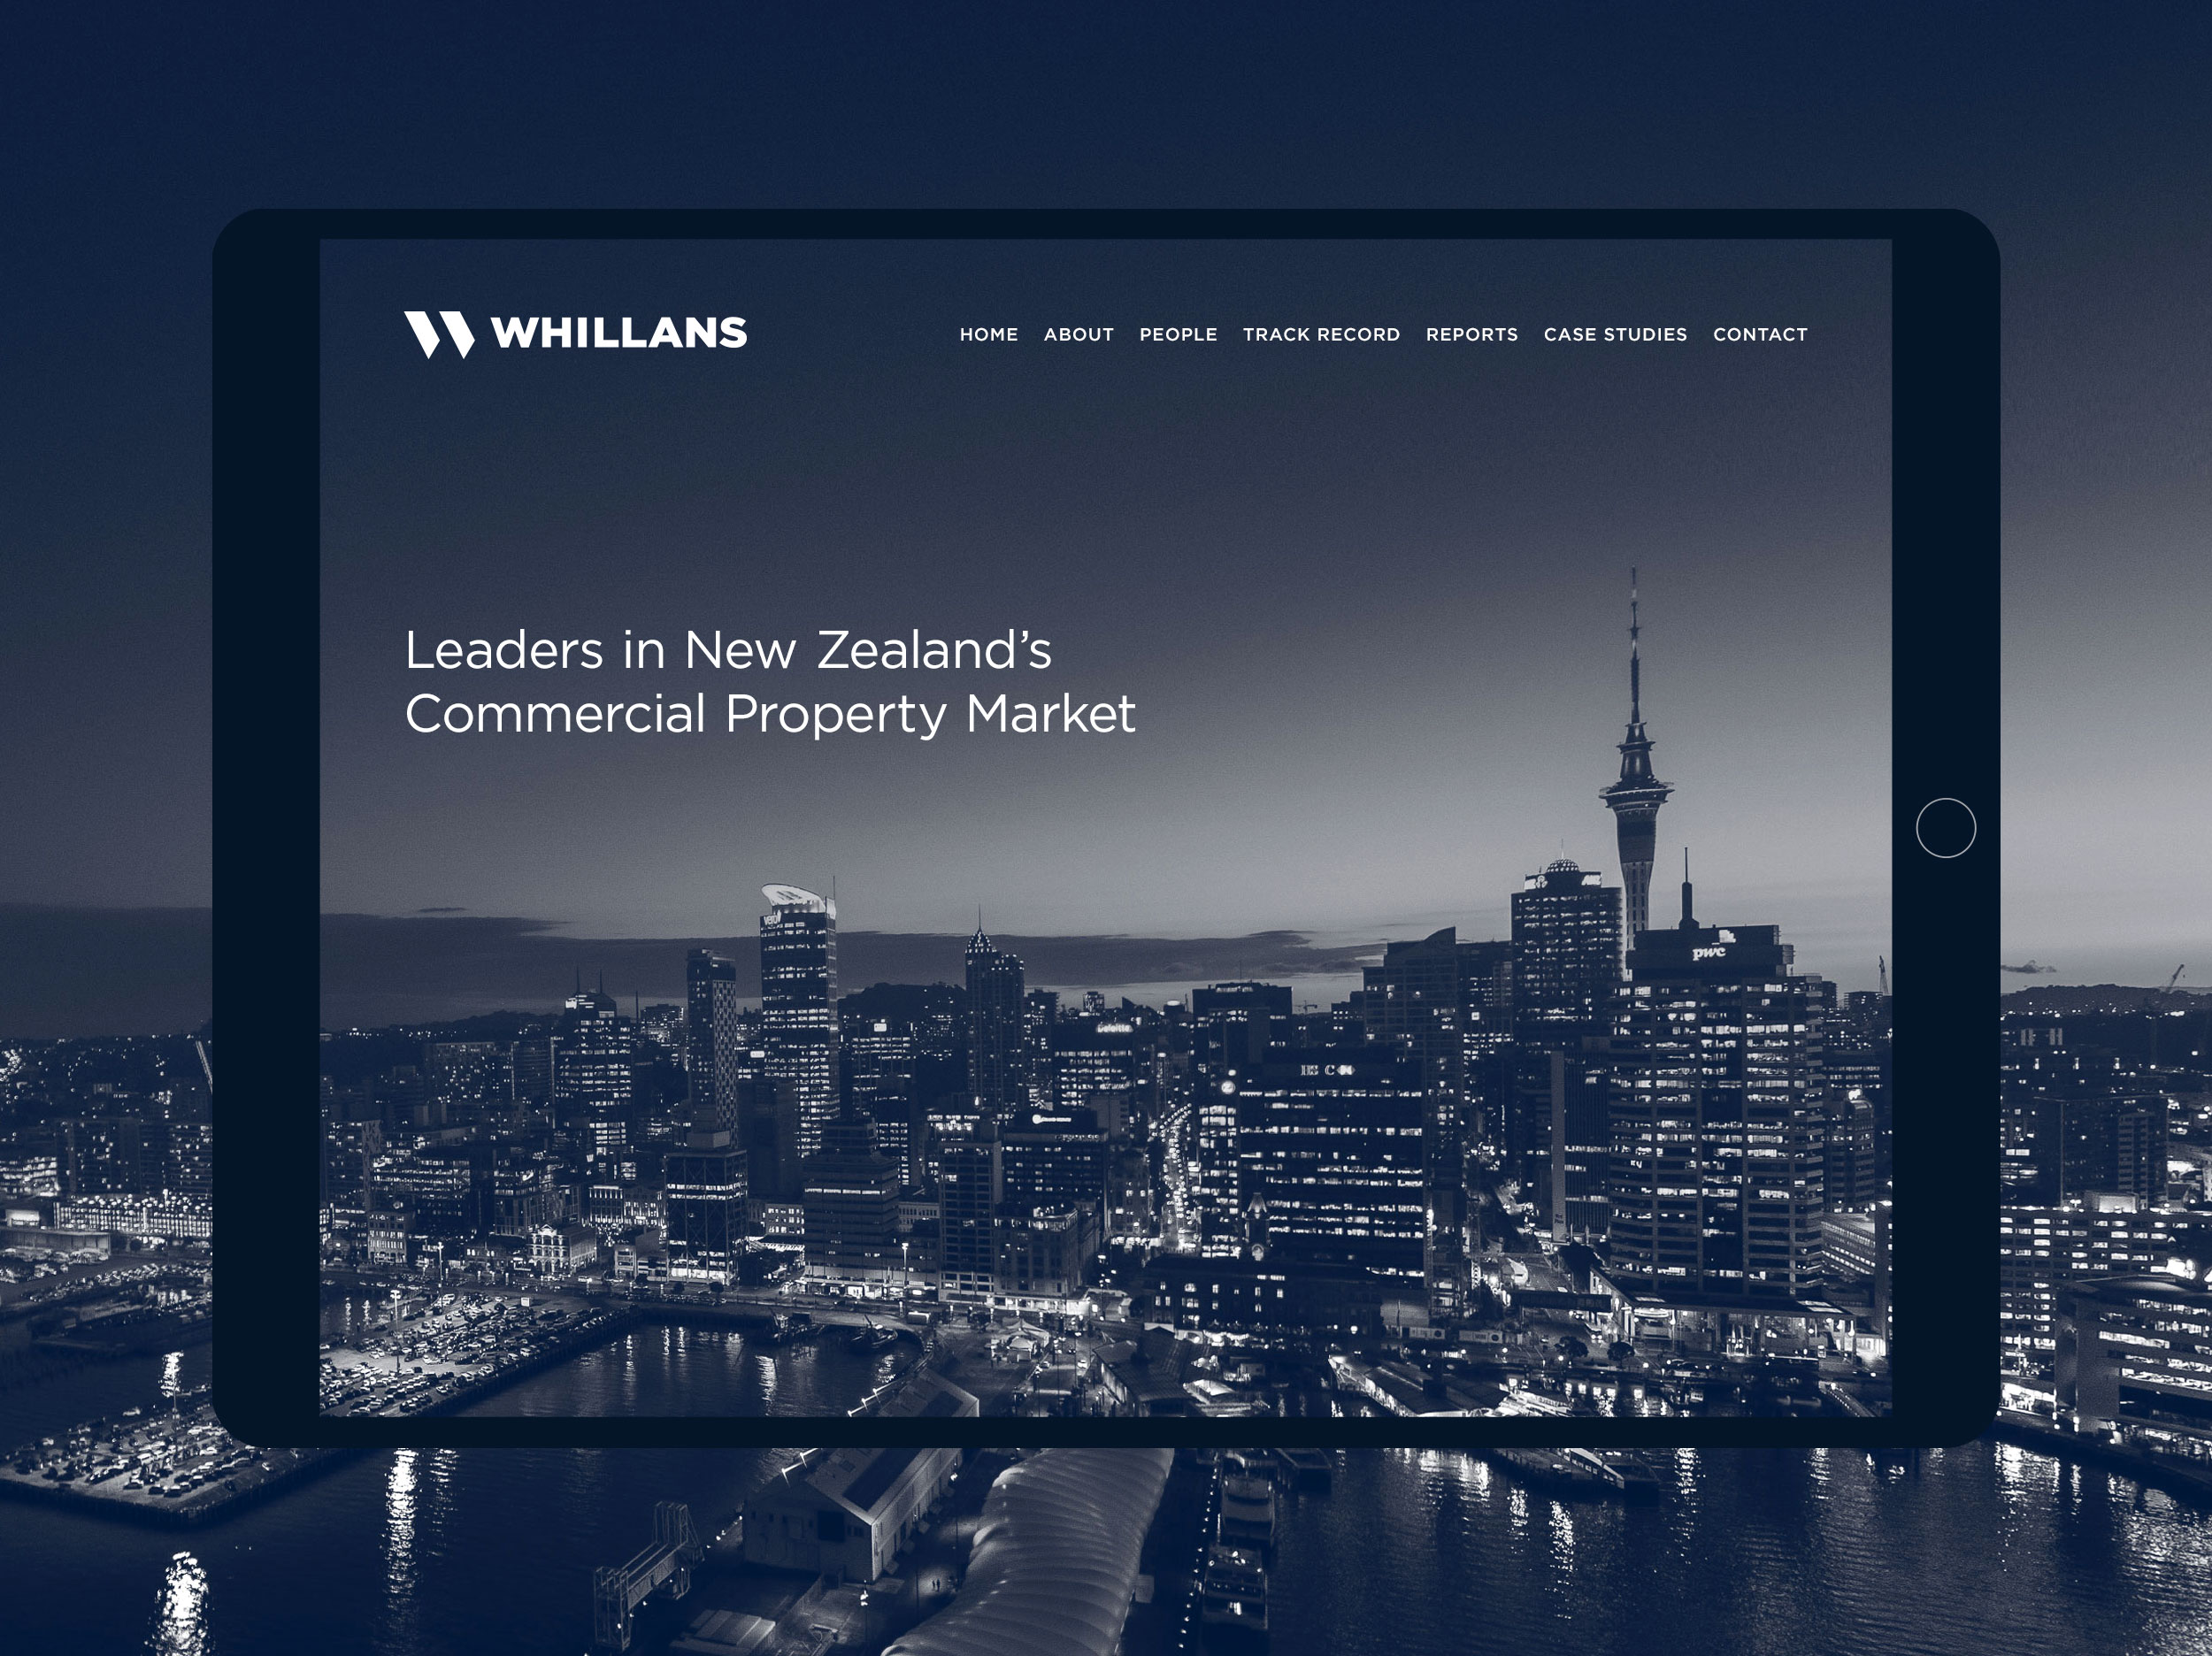 Mobile friendly website for Whillans displayed on a tablet